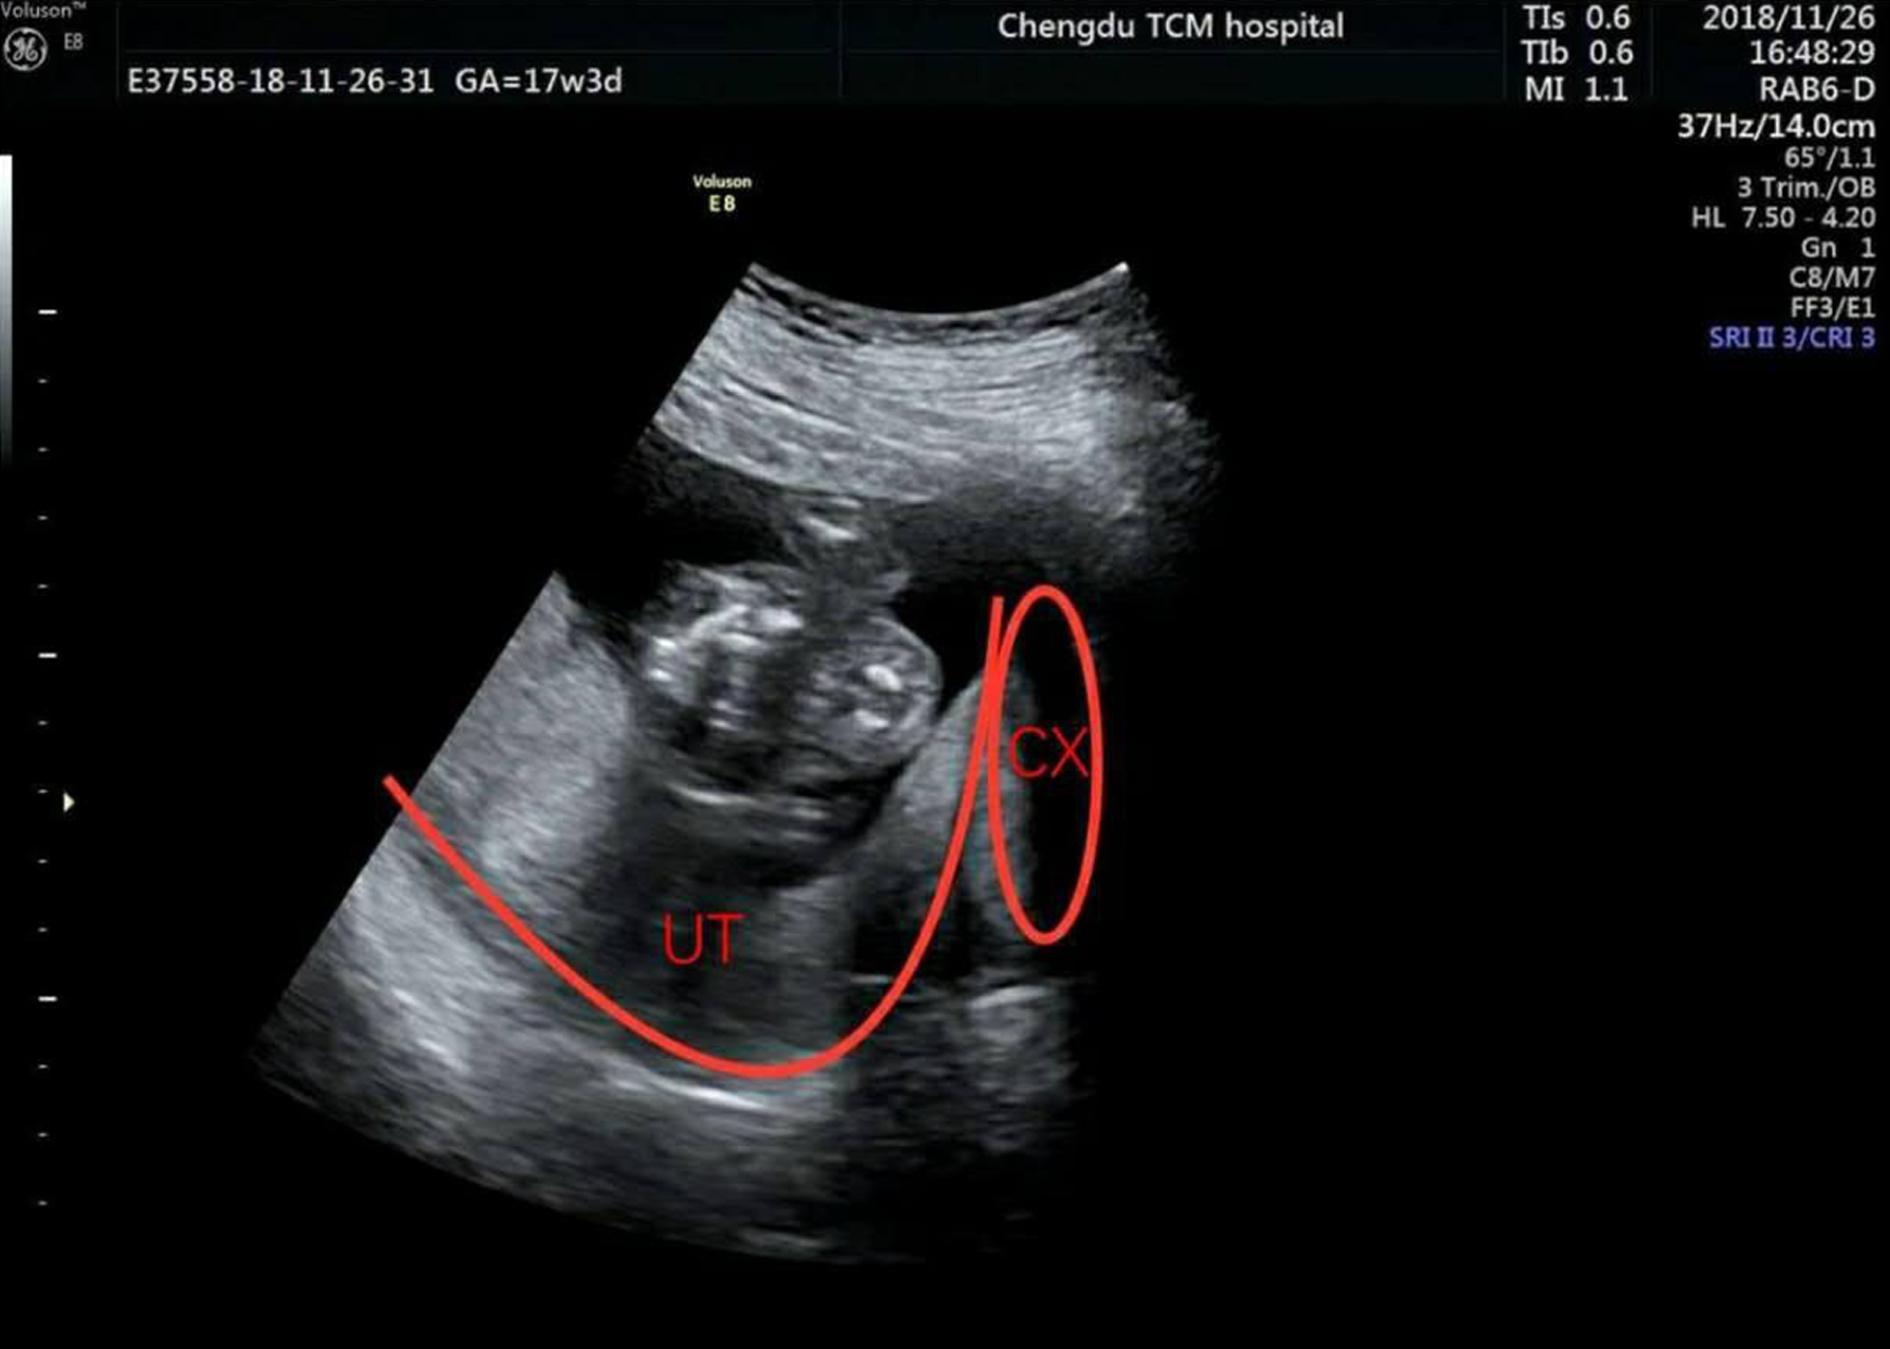 Acute urinary retention in the first and second-trimester of pregnancy:  Three case reports